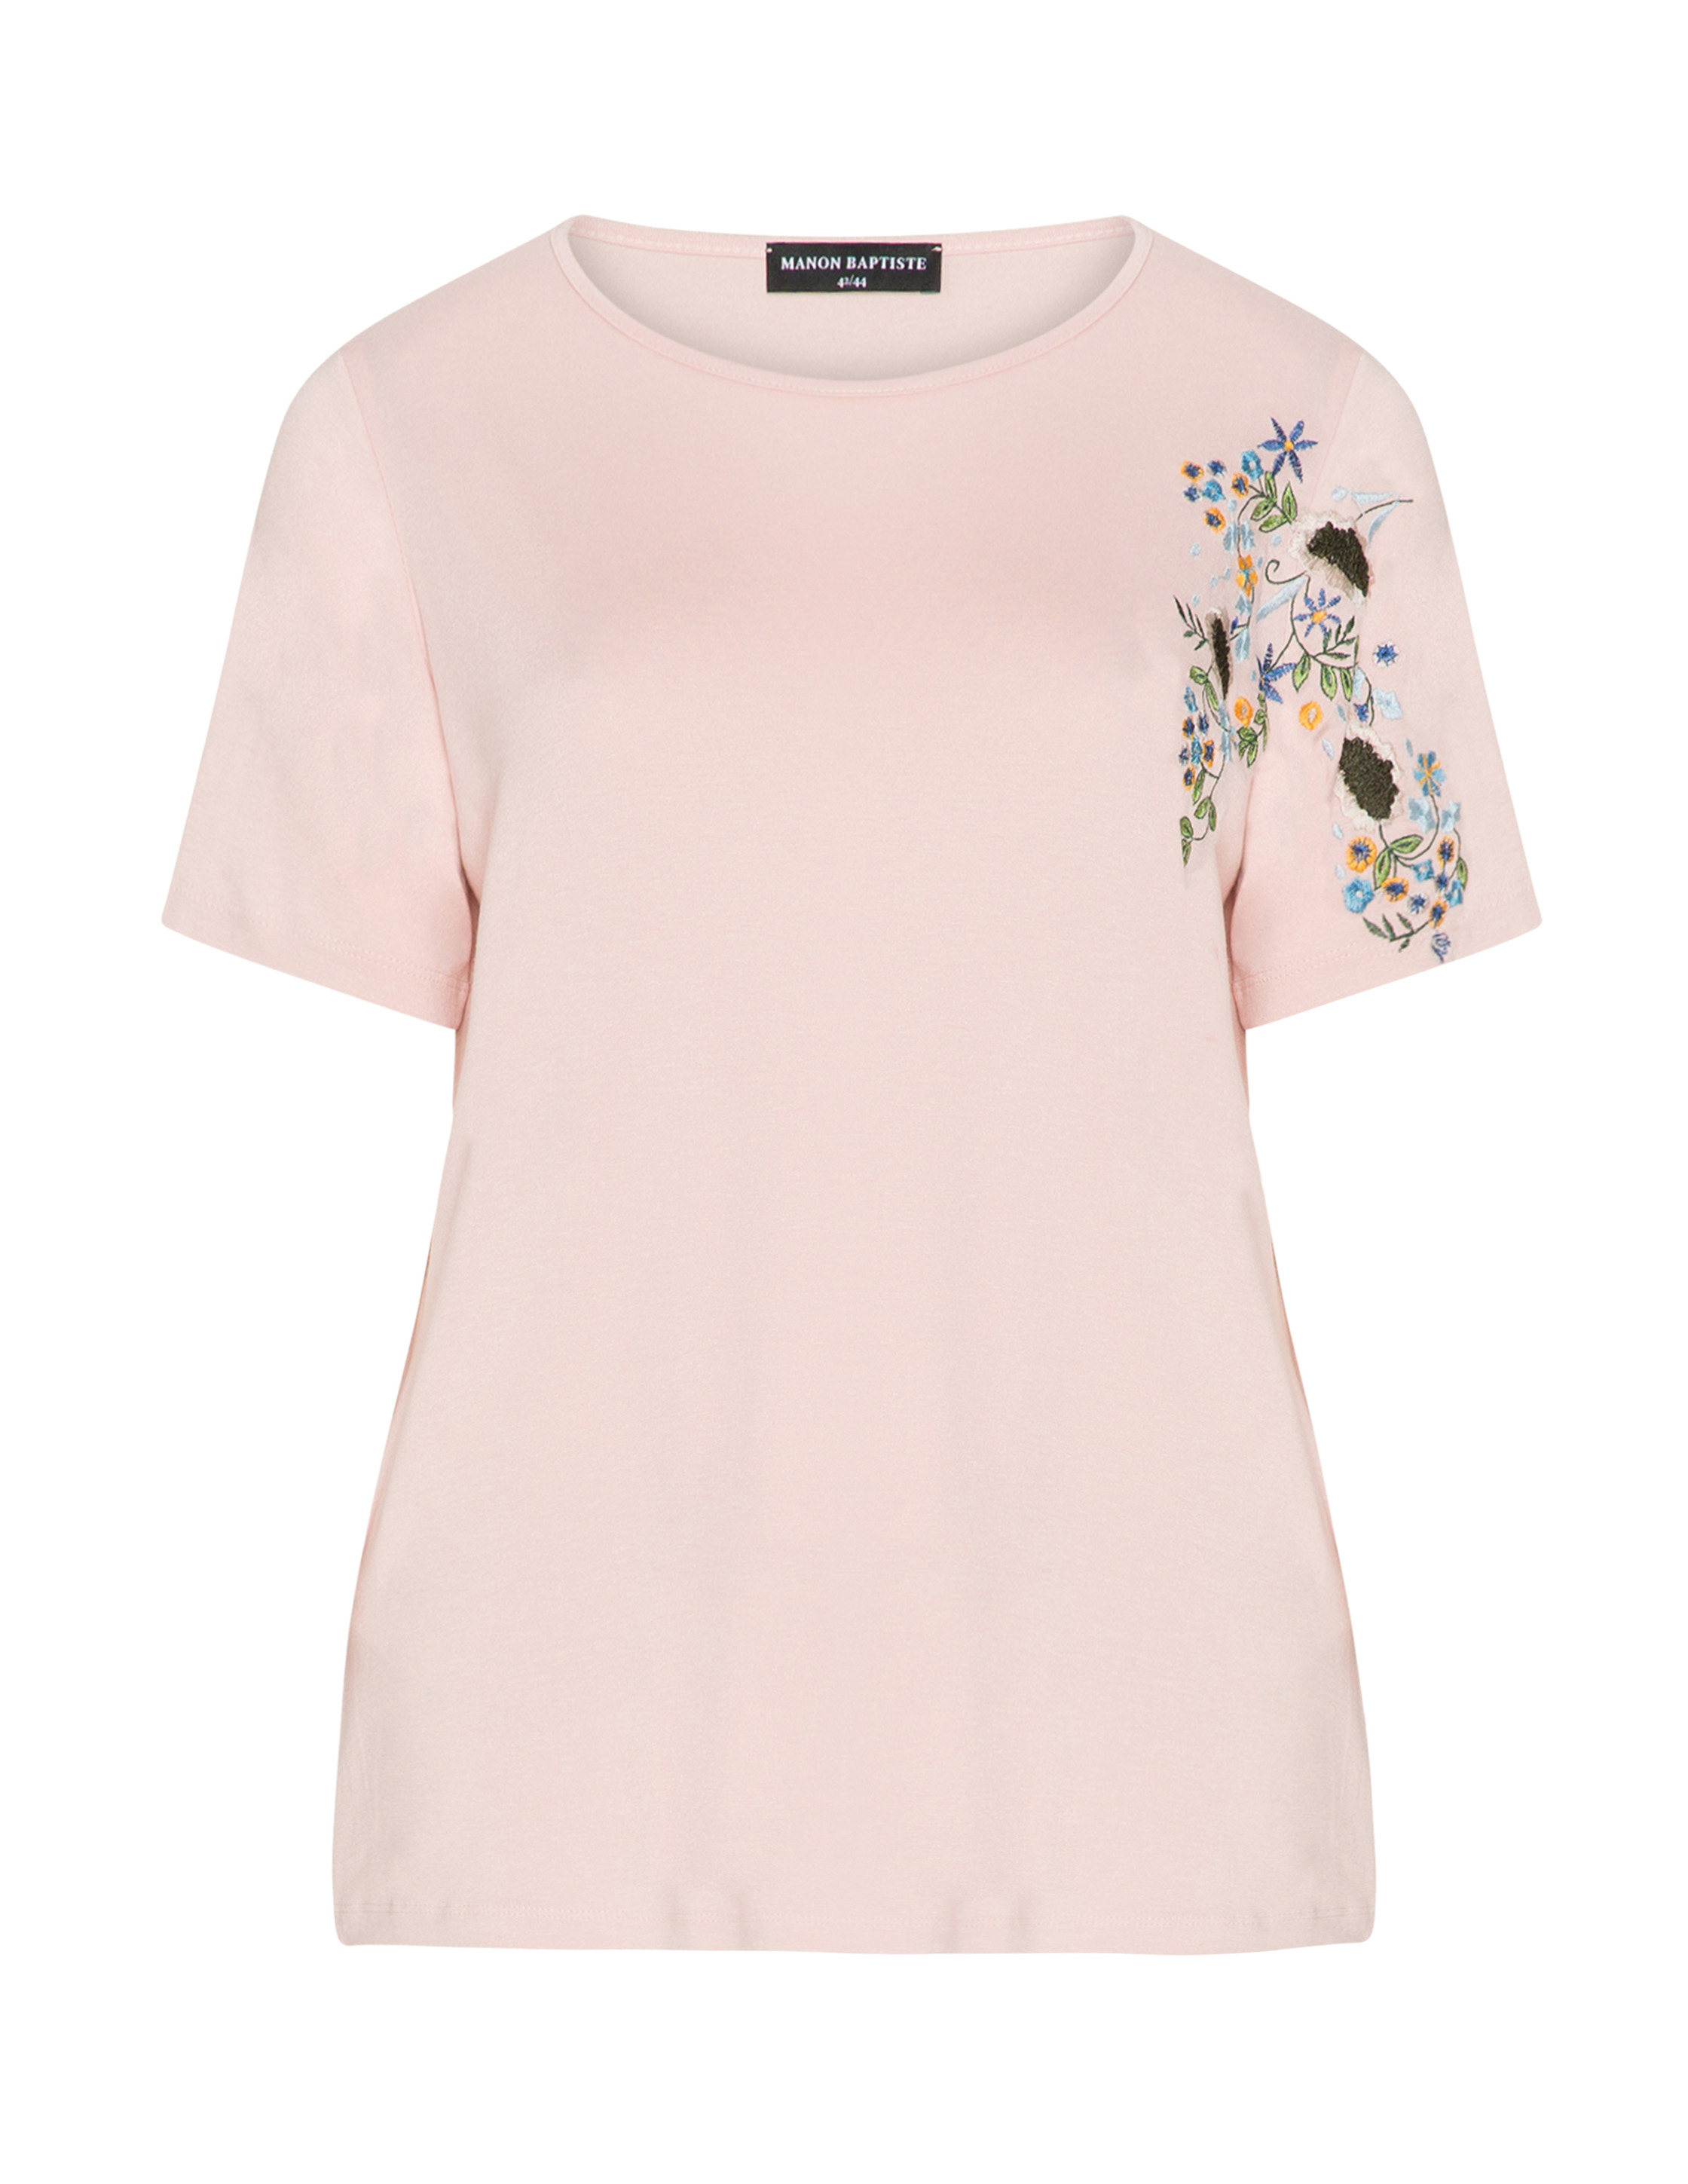 Manon Baptiste - Embroidered t-shirt